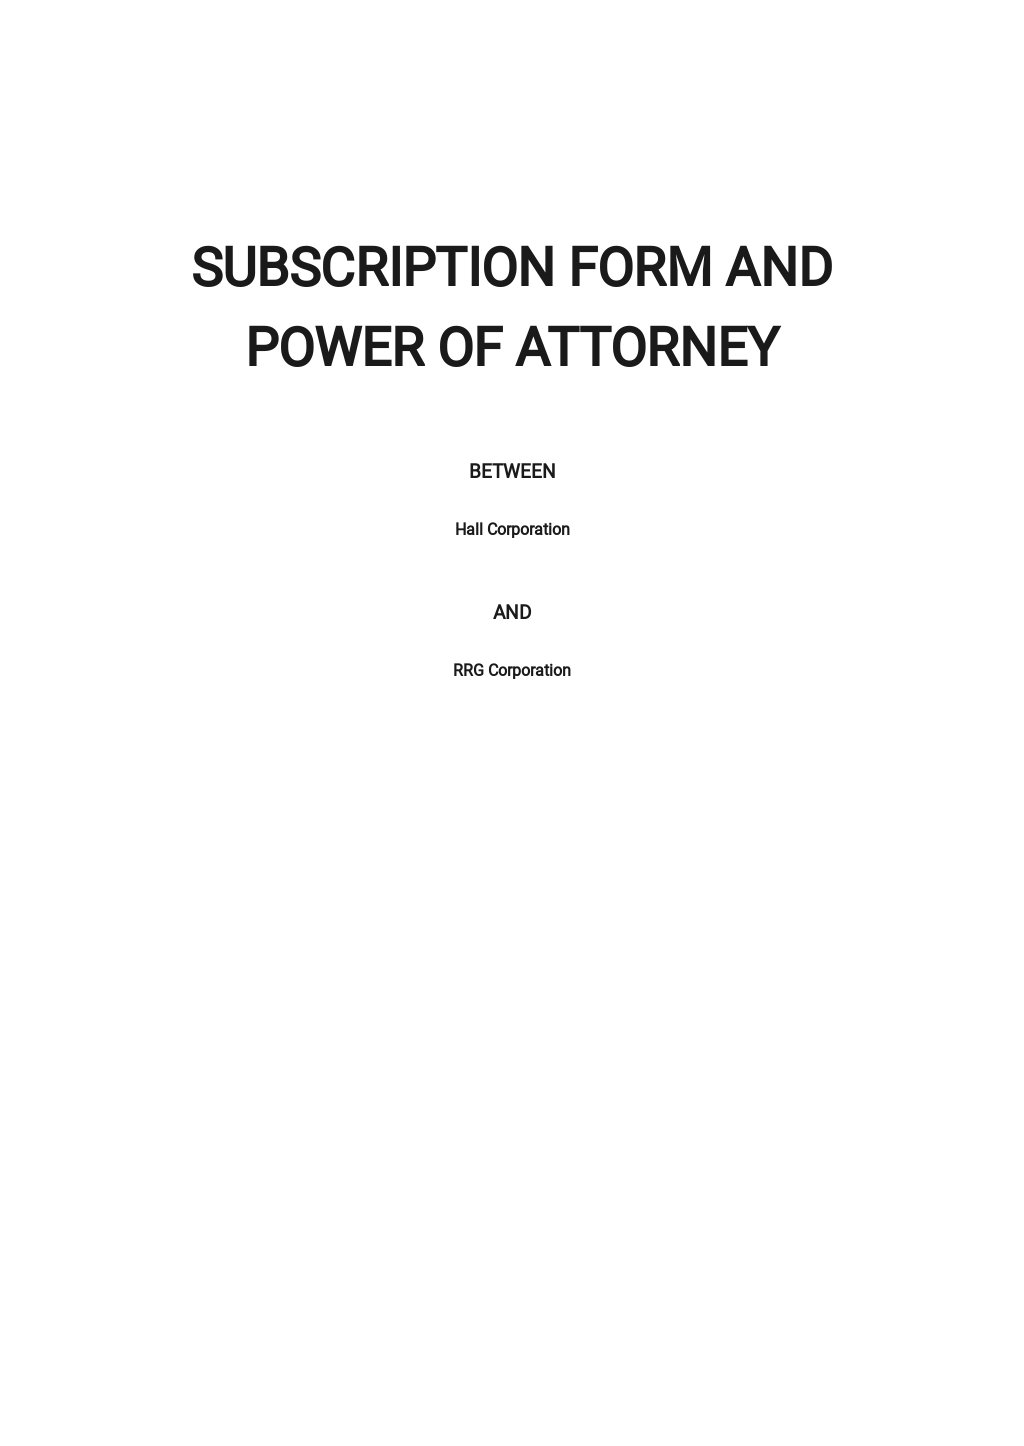 Subscription Form and Power of Attorney Template.jpe